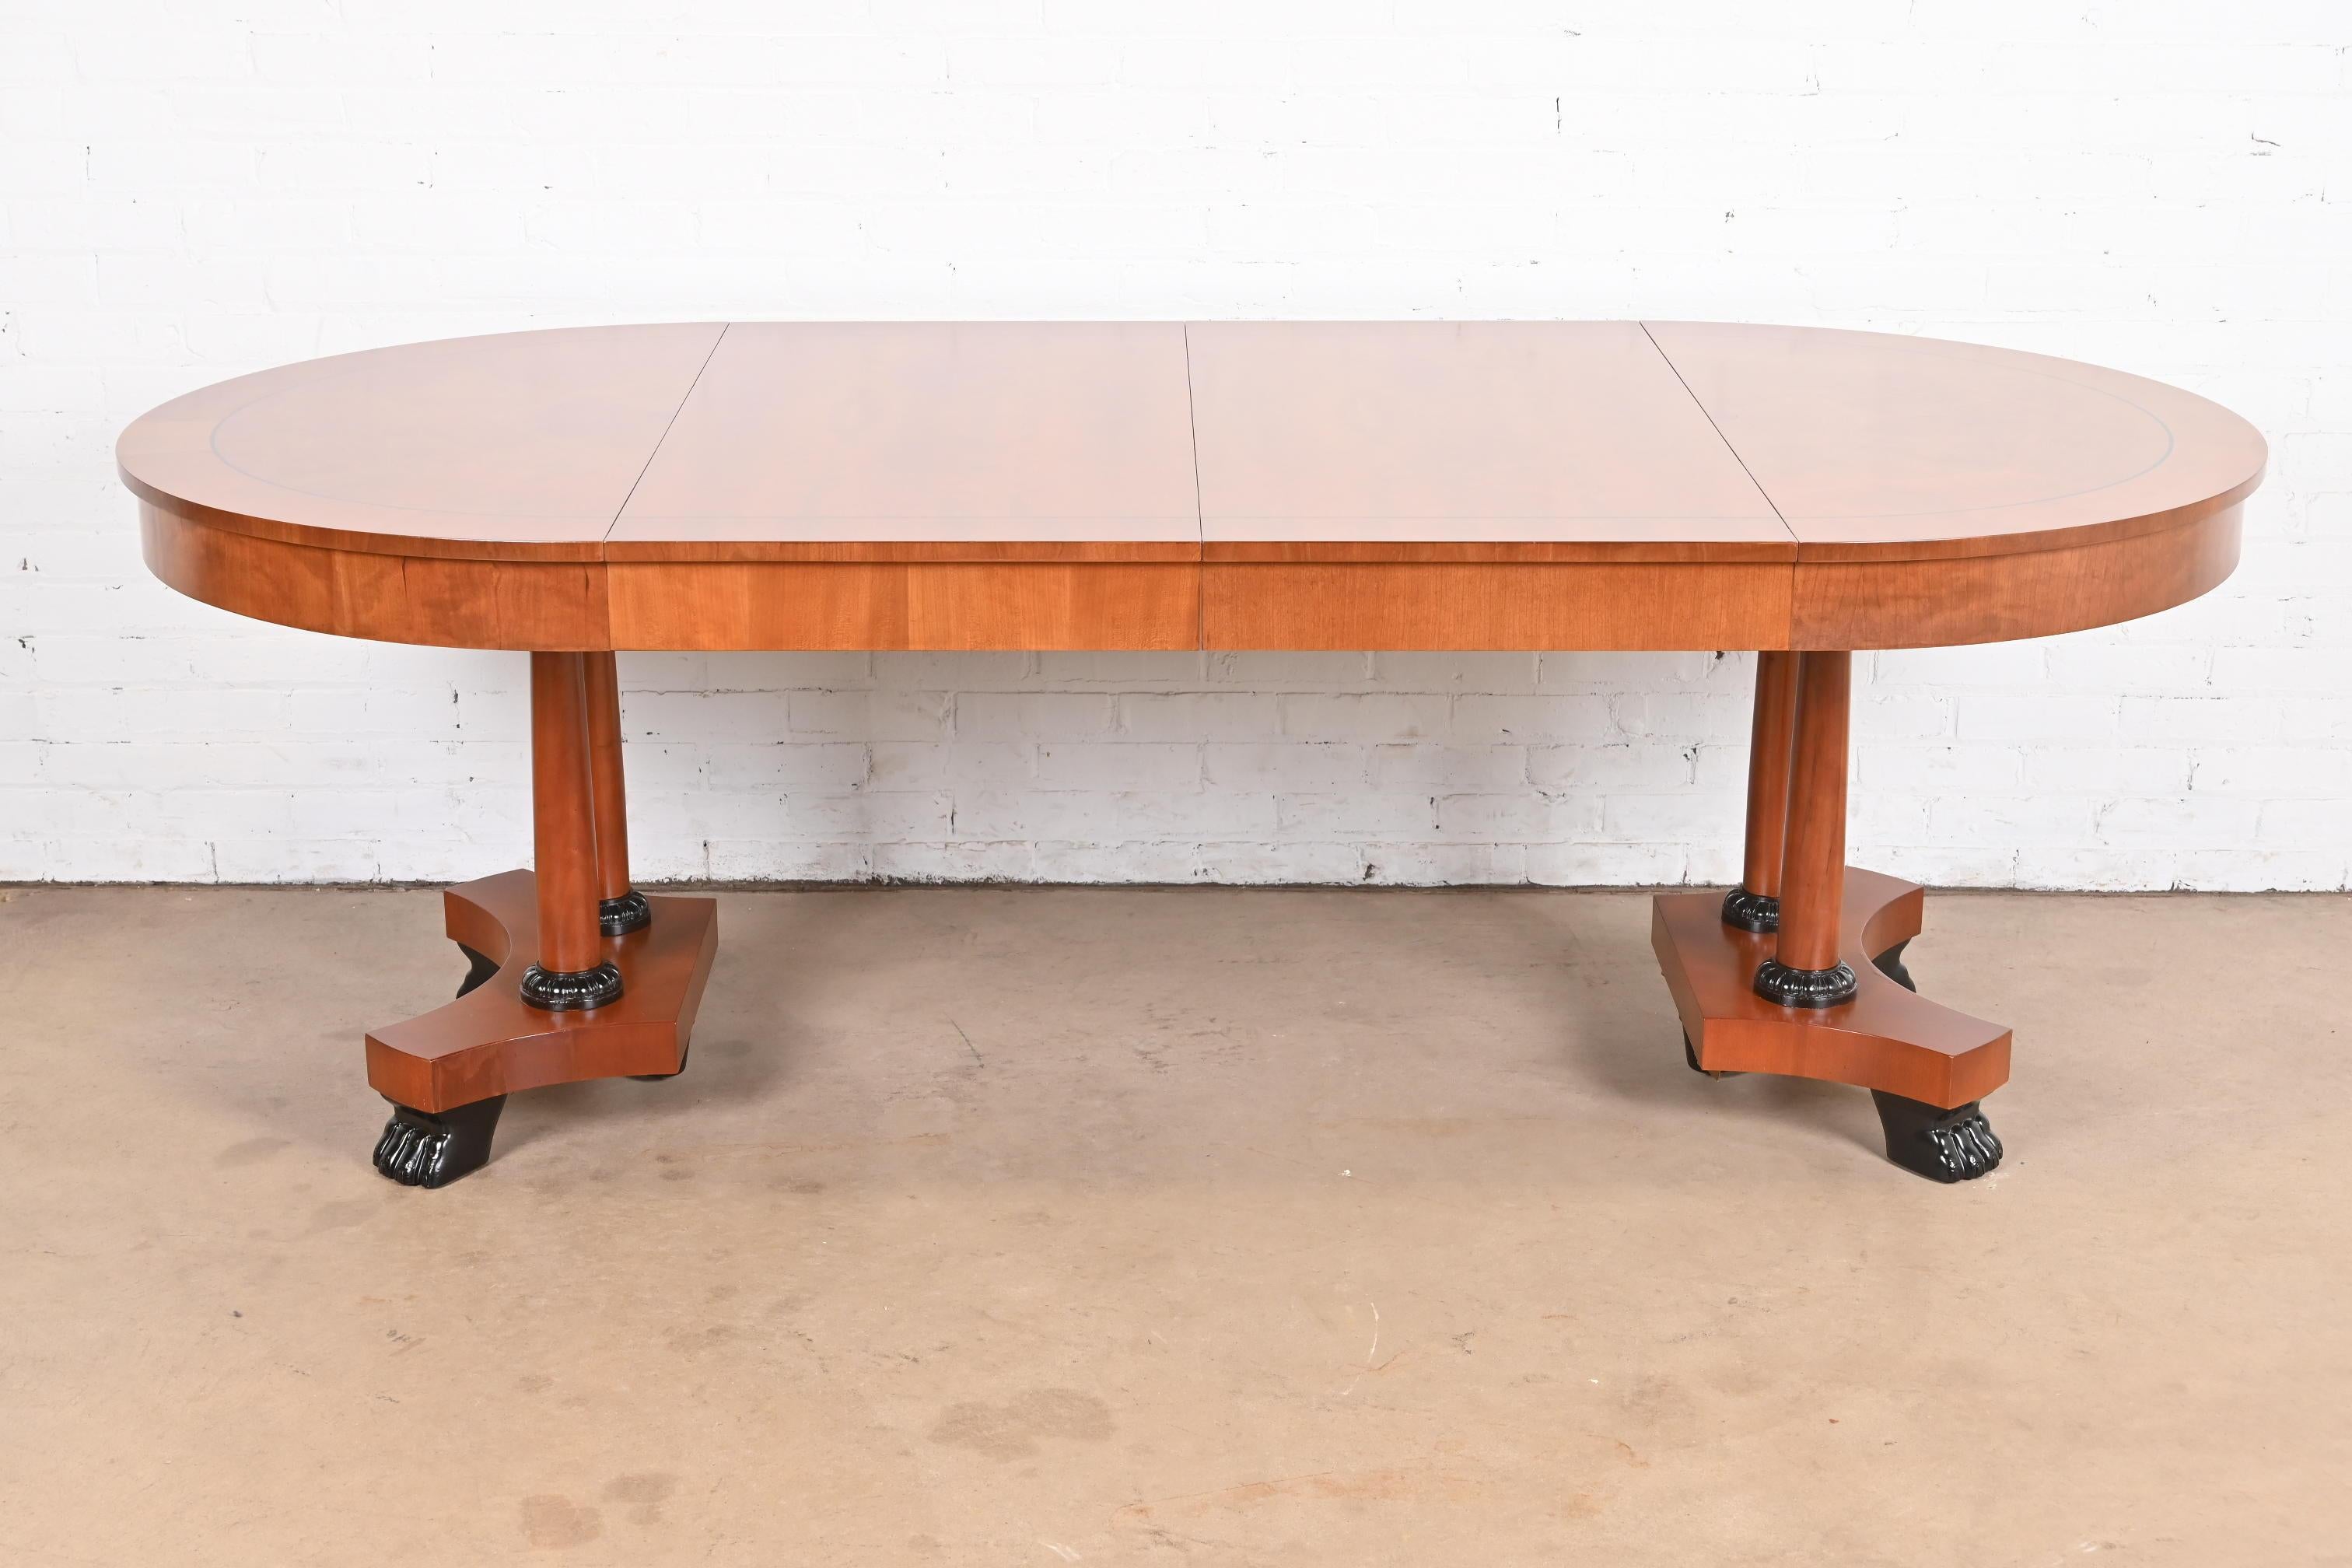 A gorgeous Neoclassical or Empire style extension dining table

By Baker Furniture, 